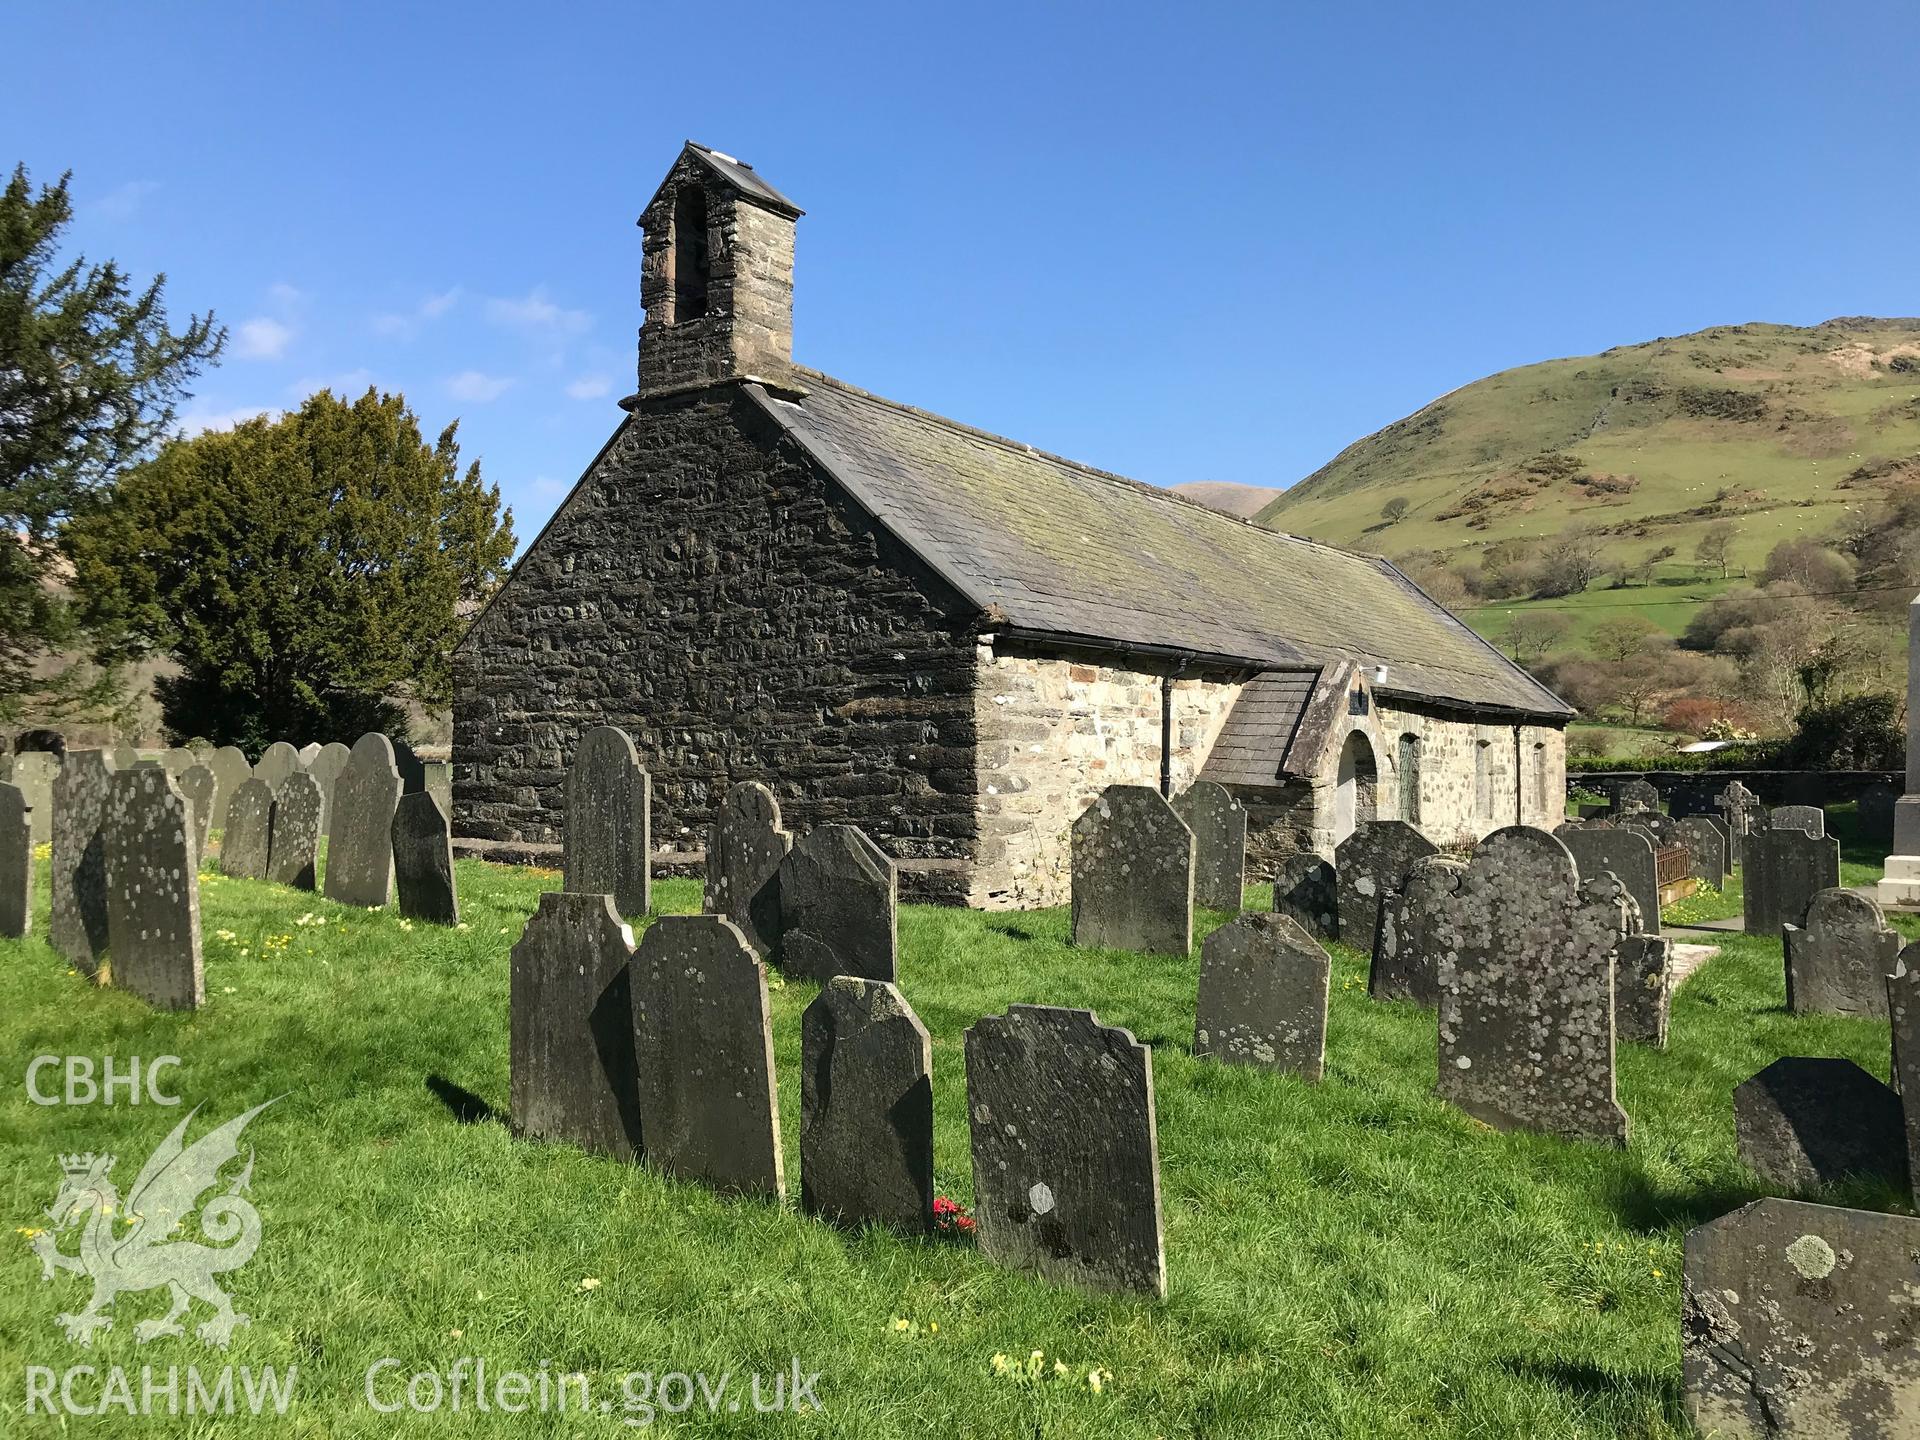 Colour photograph showing exterior view of Eglwys Mihangel (St. Michael's Church) and graveyard, Llanfihangel-y-Pennant, taken by Paul R. Davis on 28th March 2019.